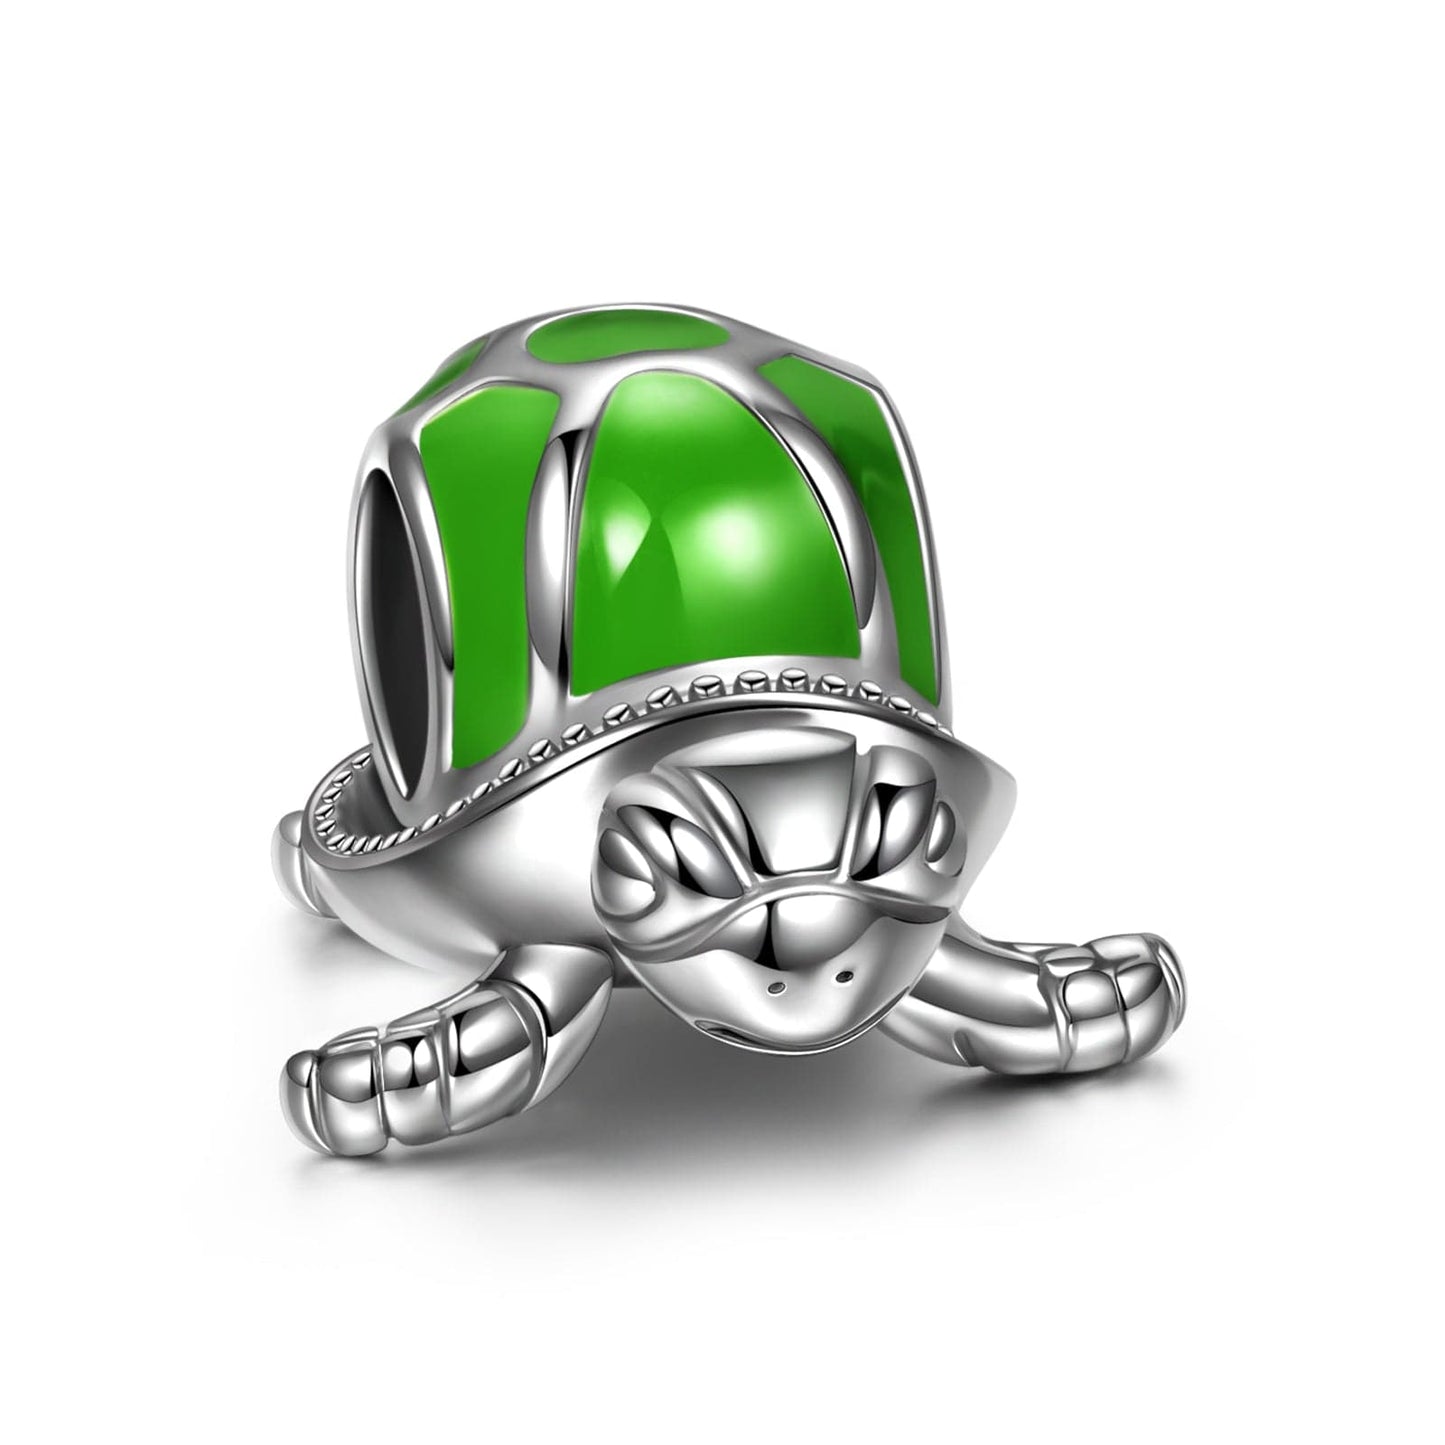 Sterling Silver Green Turtle Charms With Enamel In White Gold Plated